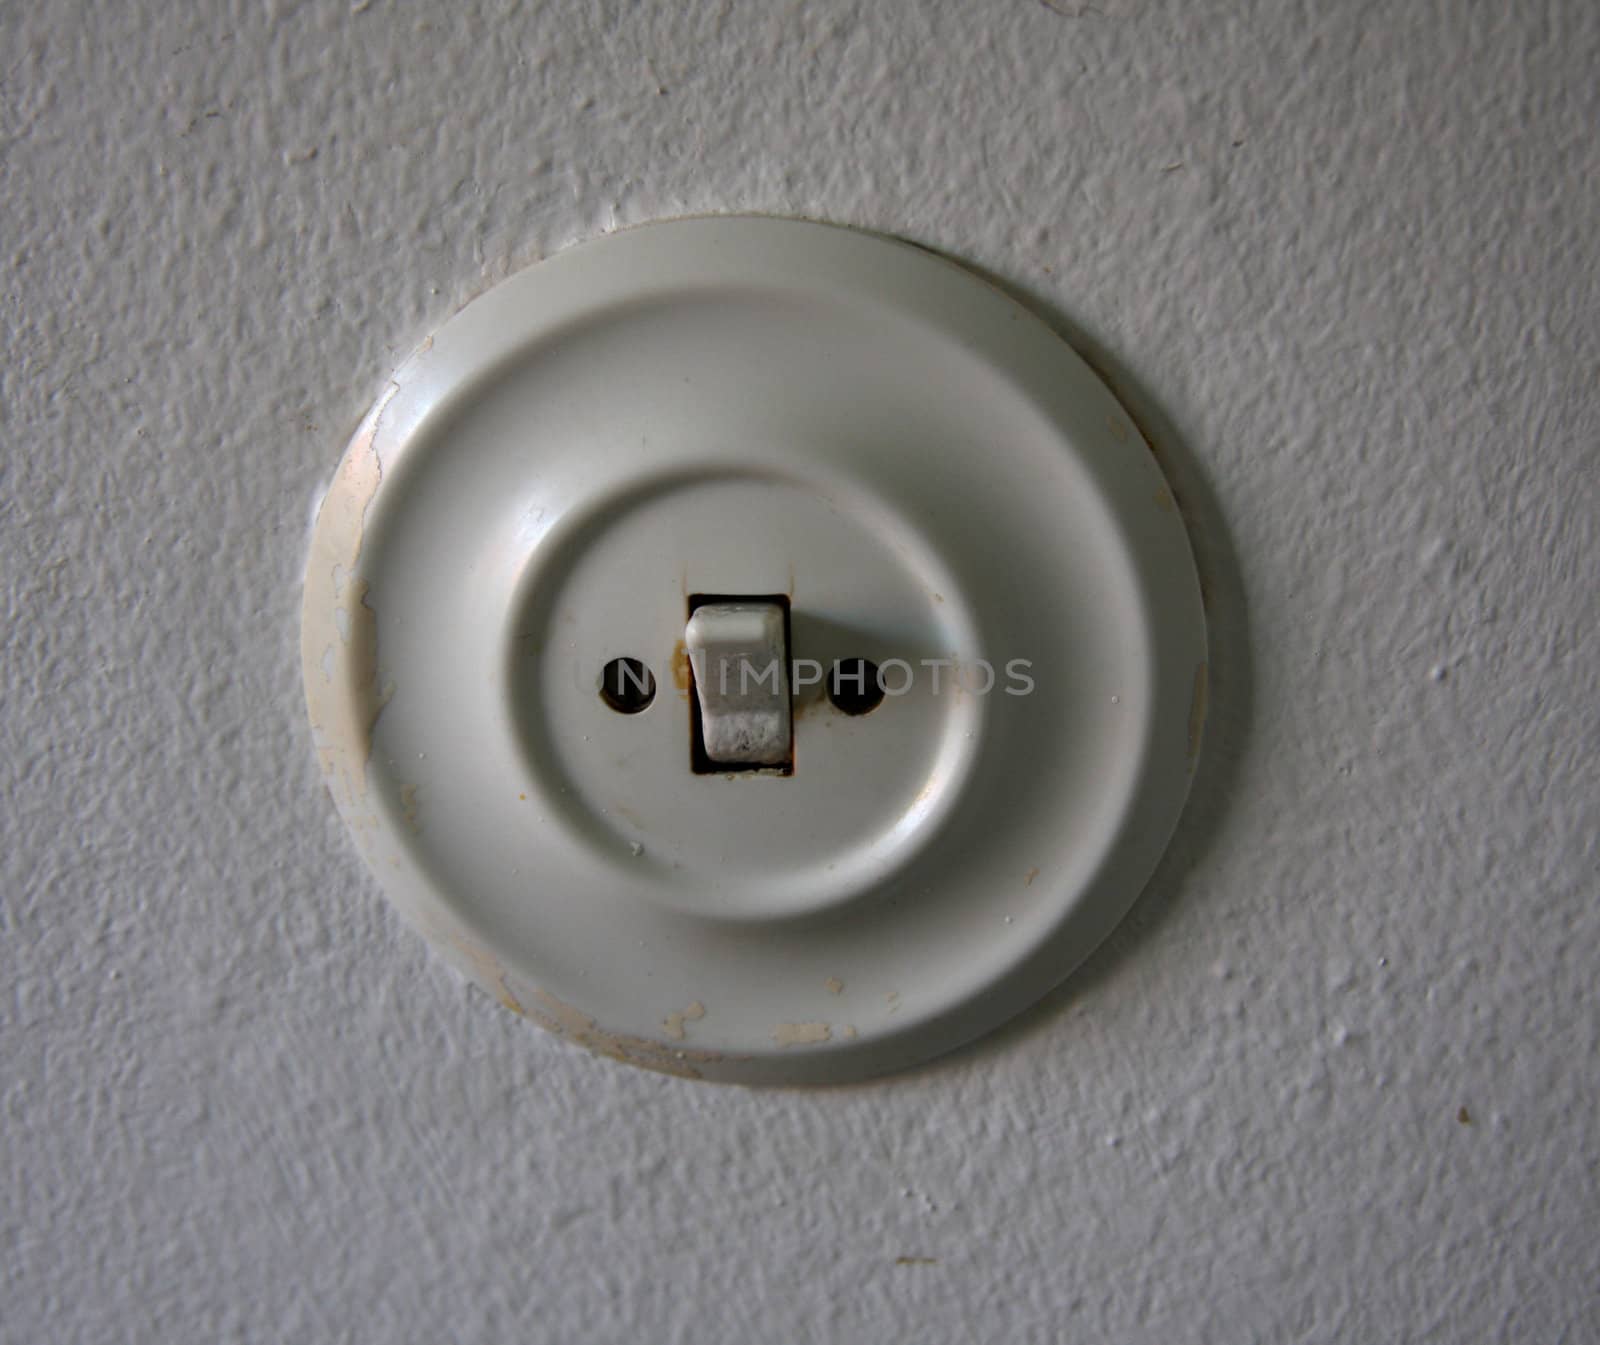 Old round white switch on a white wall.